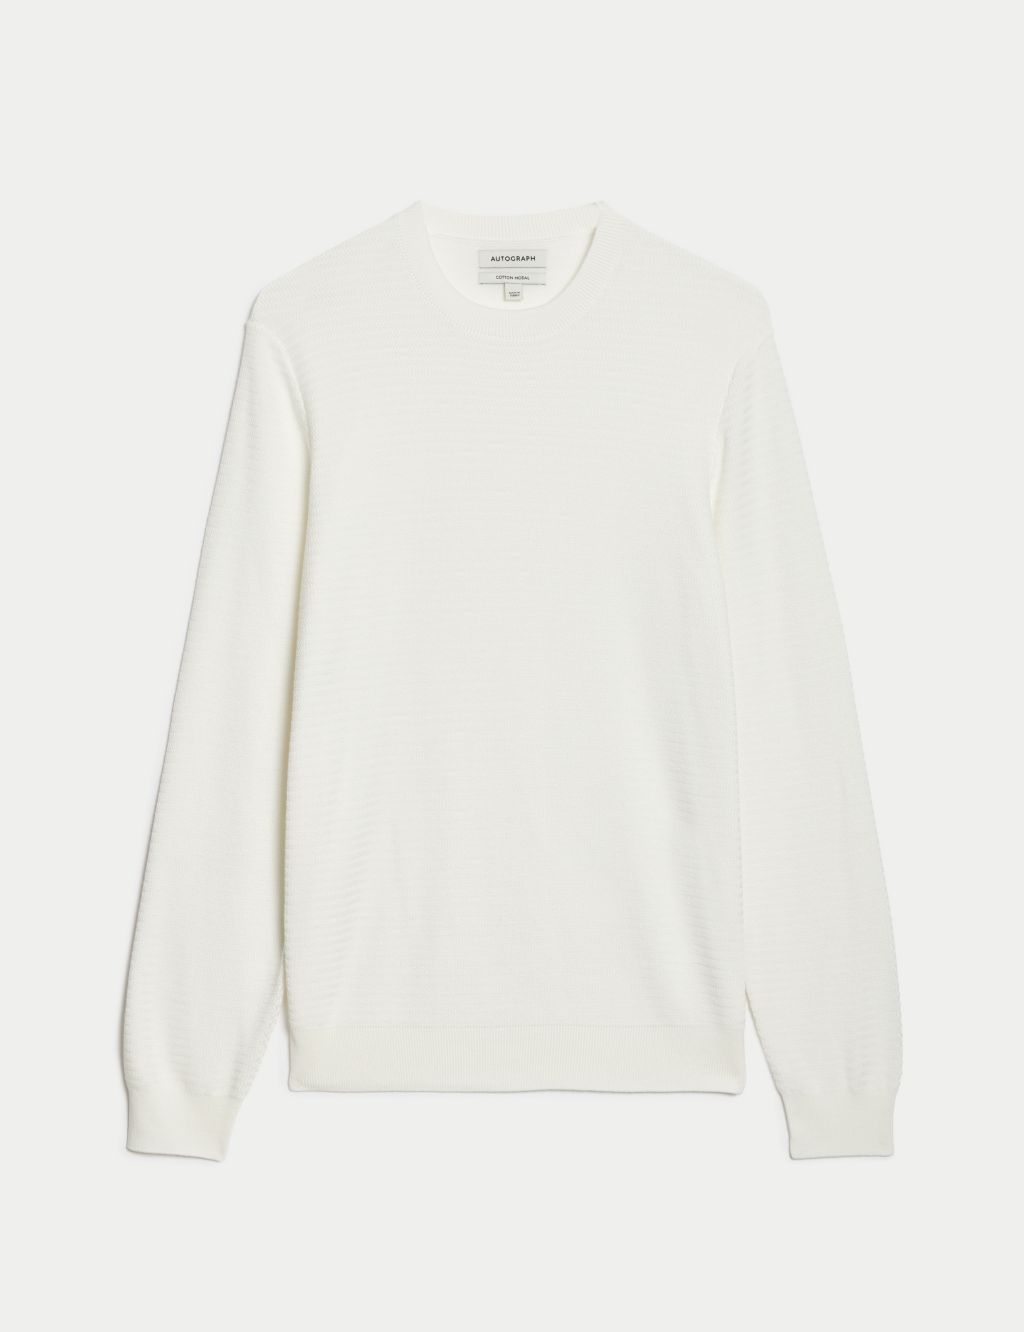 Cotton and Modal Blend Textured Crew Neck Jumper image 2